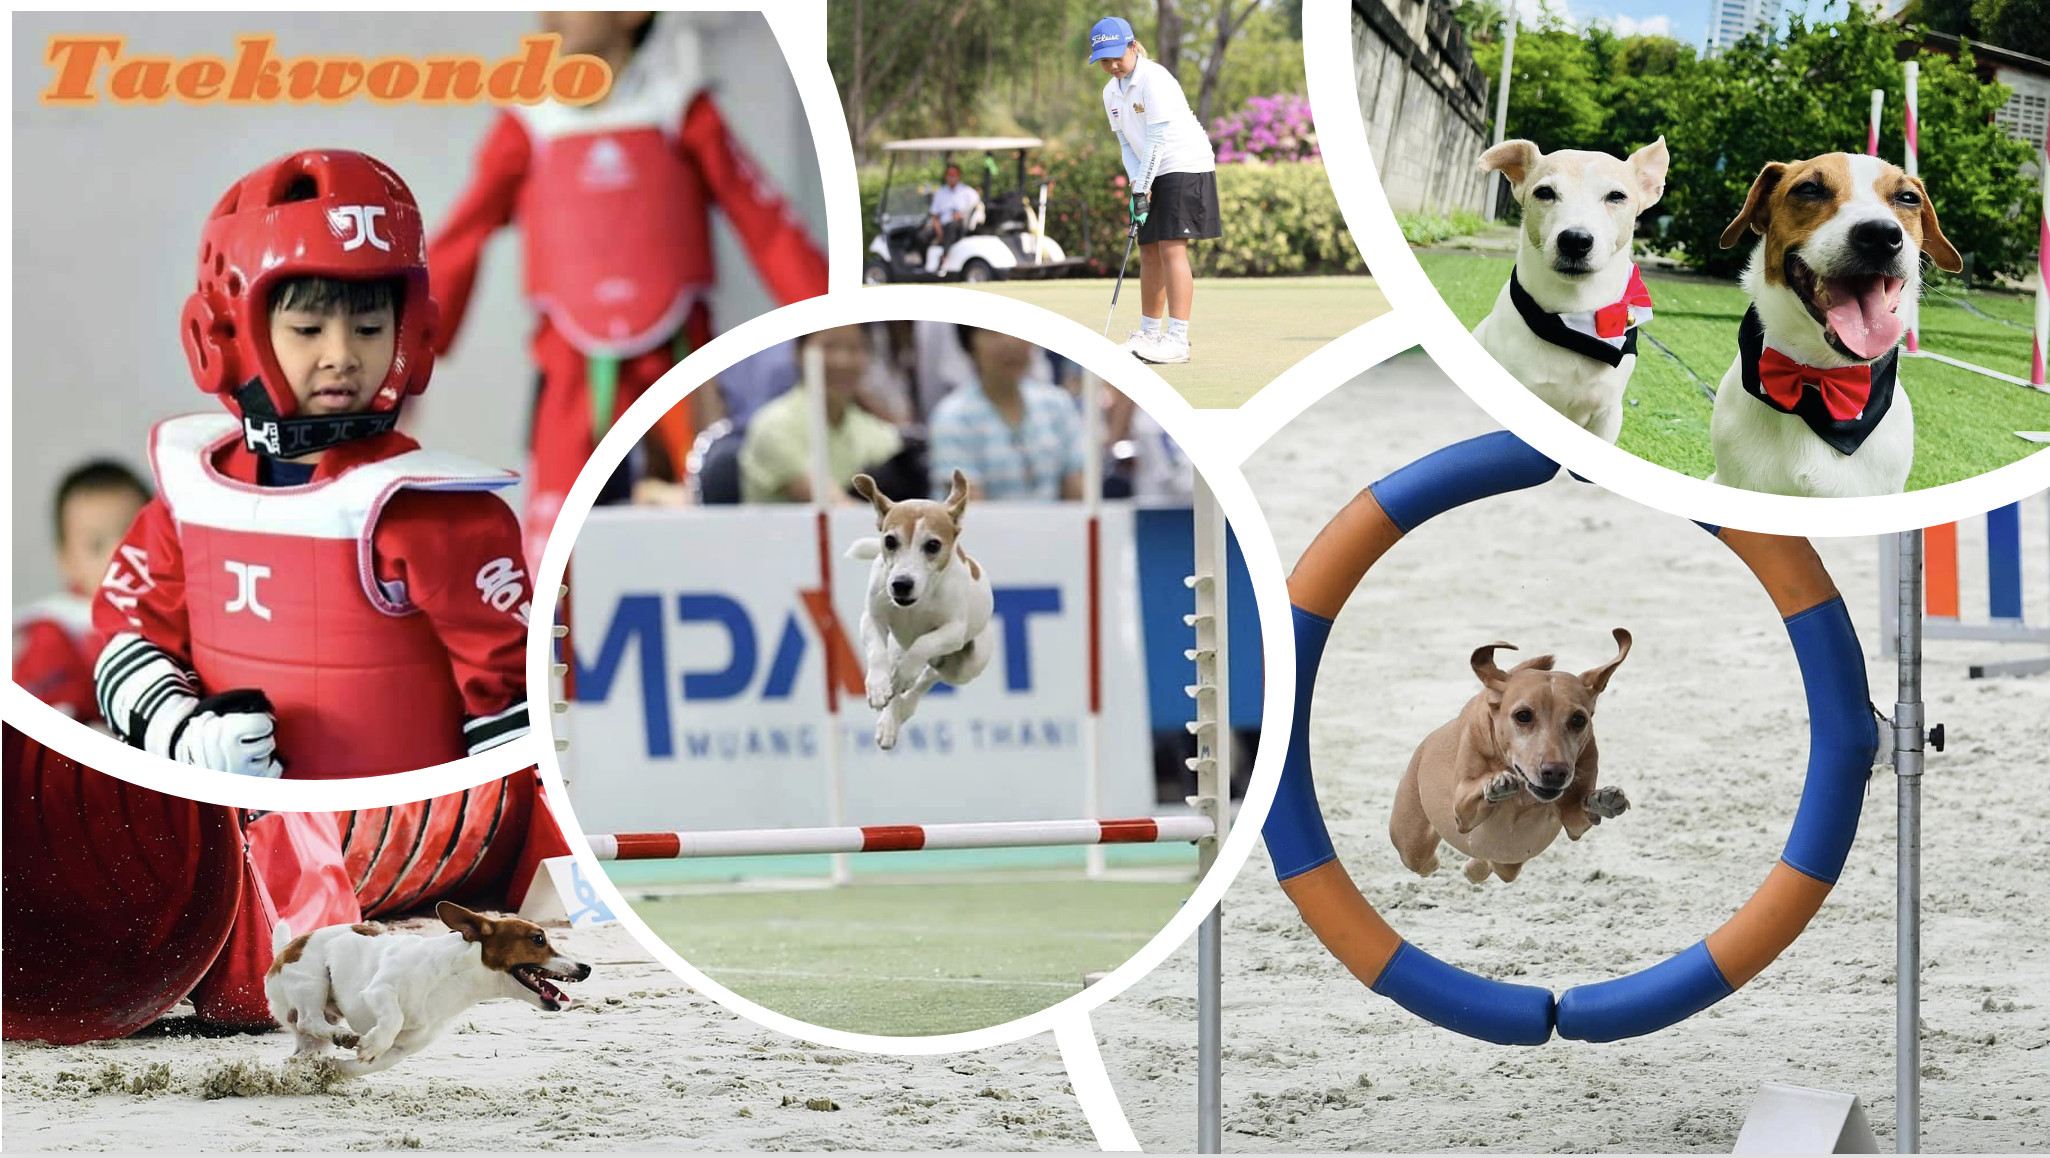 ZSC25: Materials for Sports and Pets (2/2566)